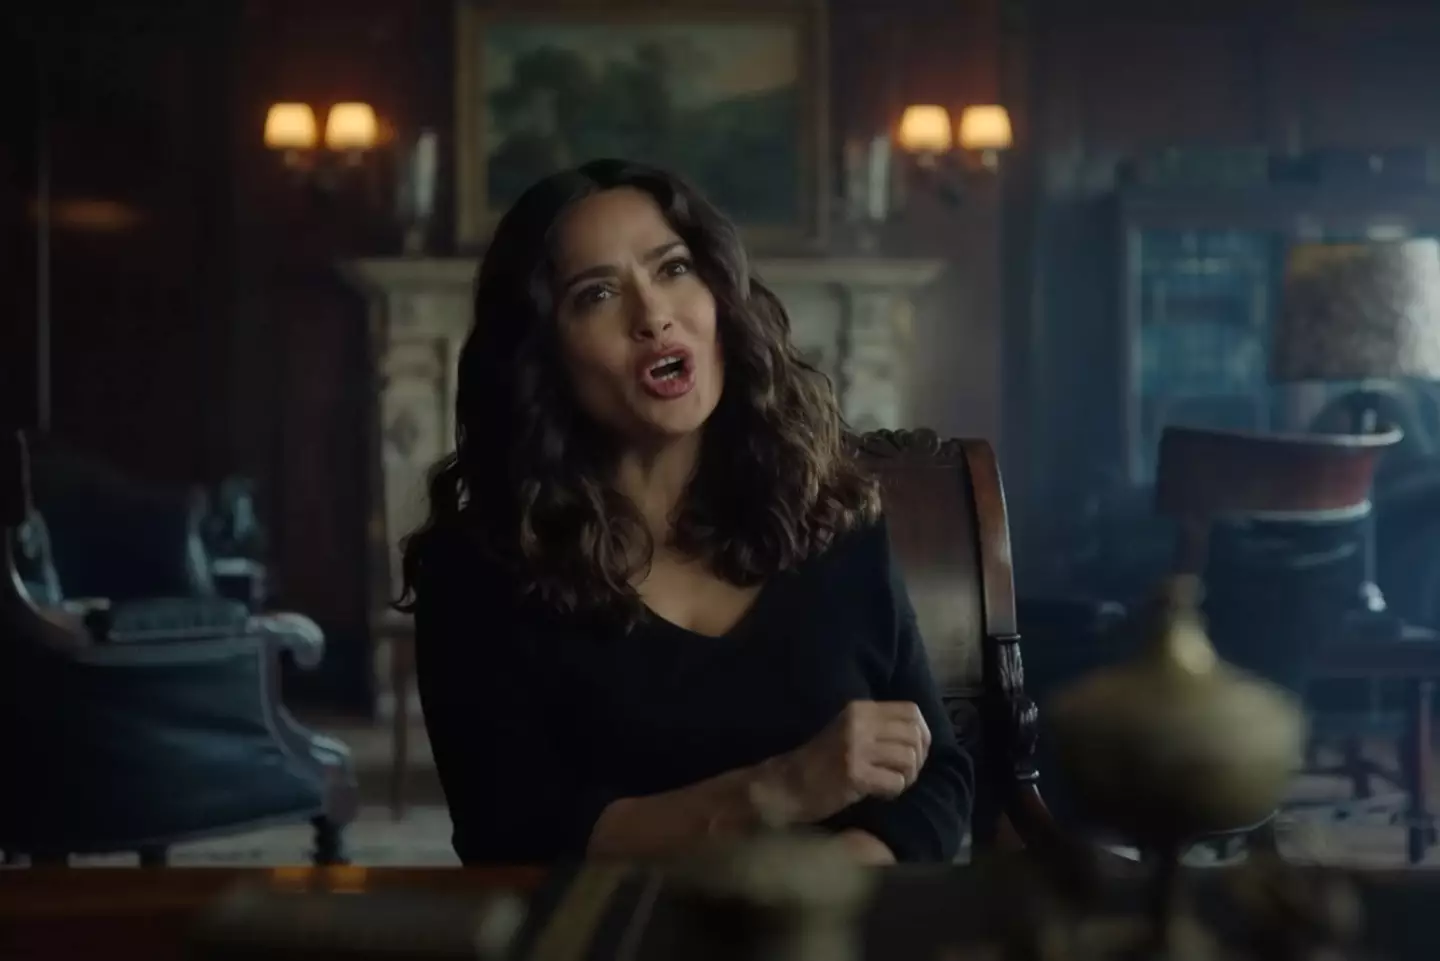 Salma Hayek Pinault looks like she's going to don this new role.